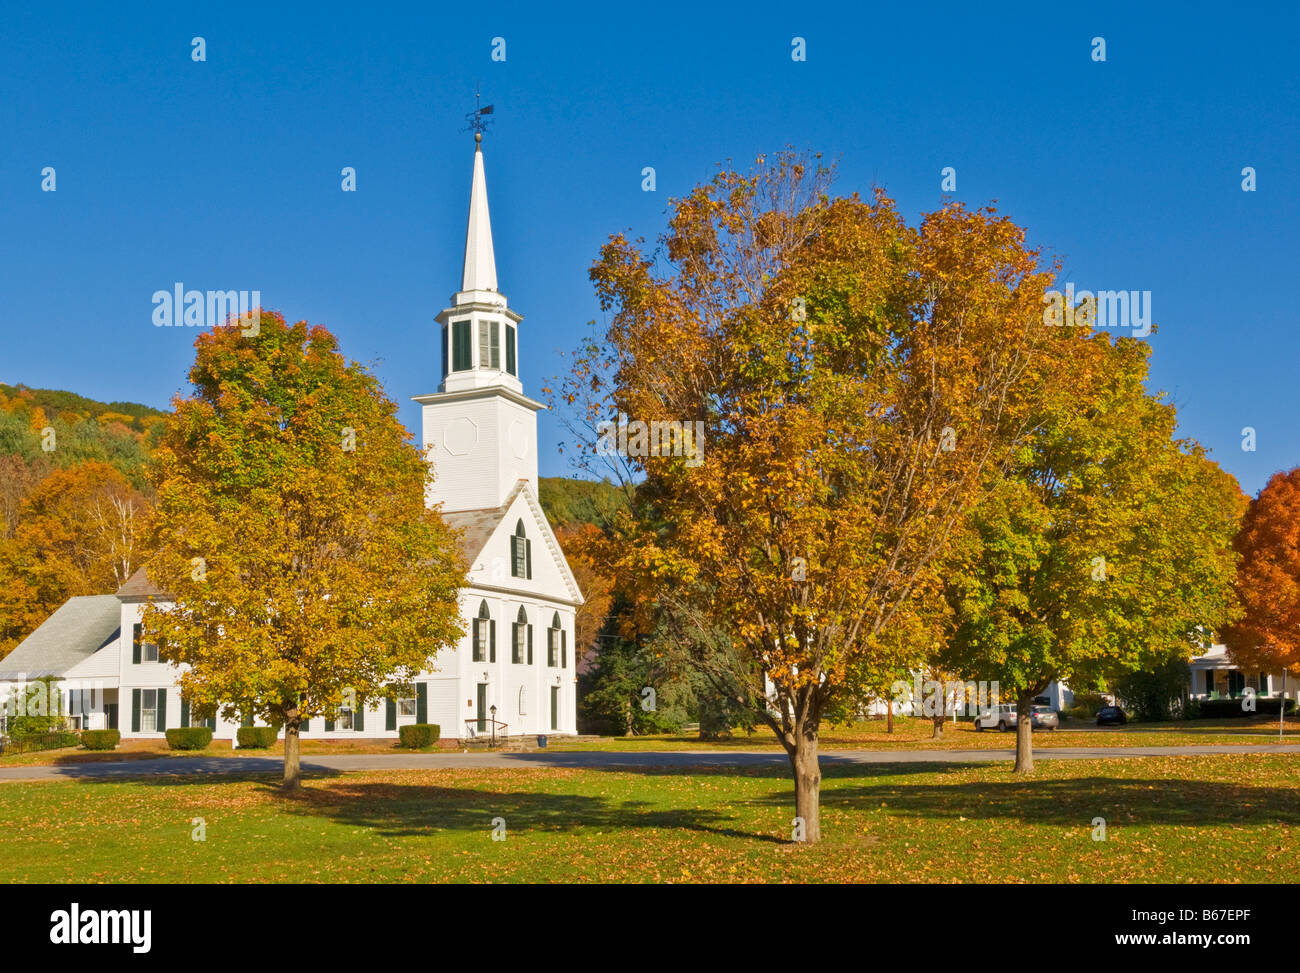 Autumn colours around the traditional white timber clad church Townshend Vermont United States of America USA Stock Photo